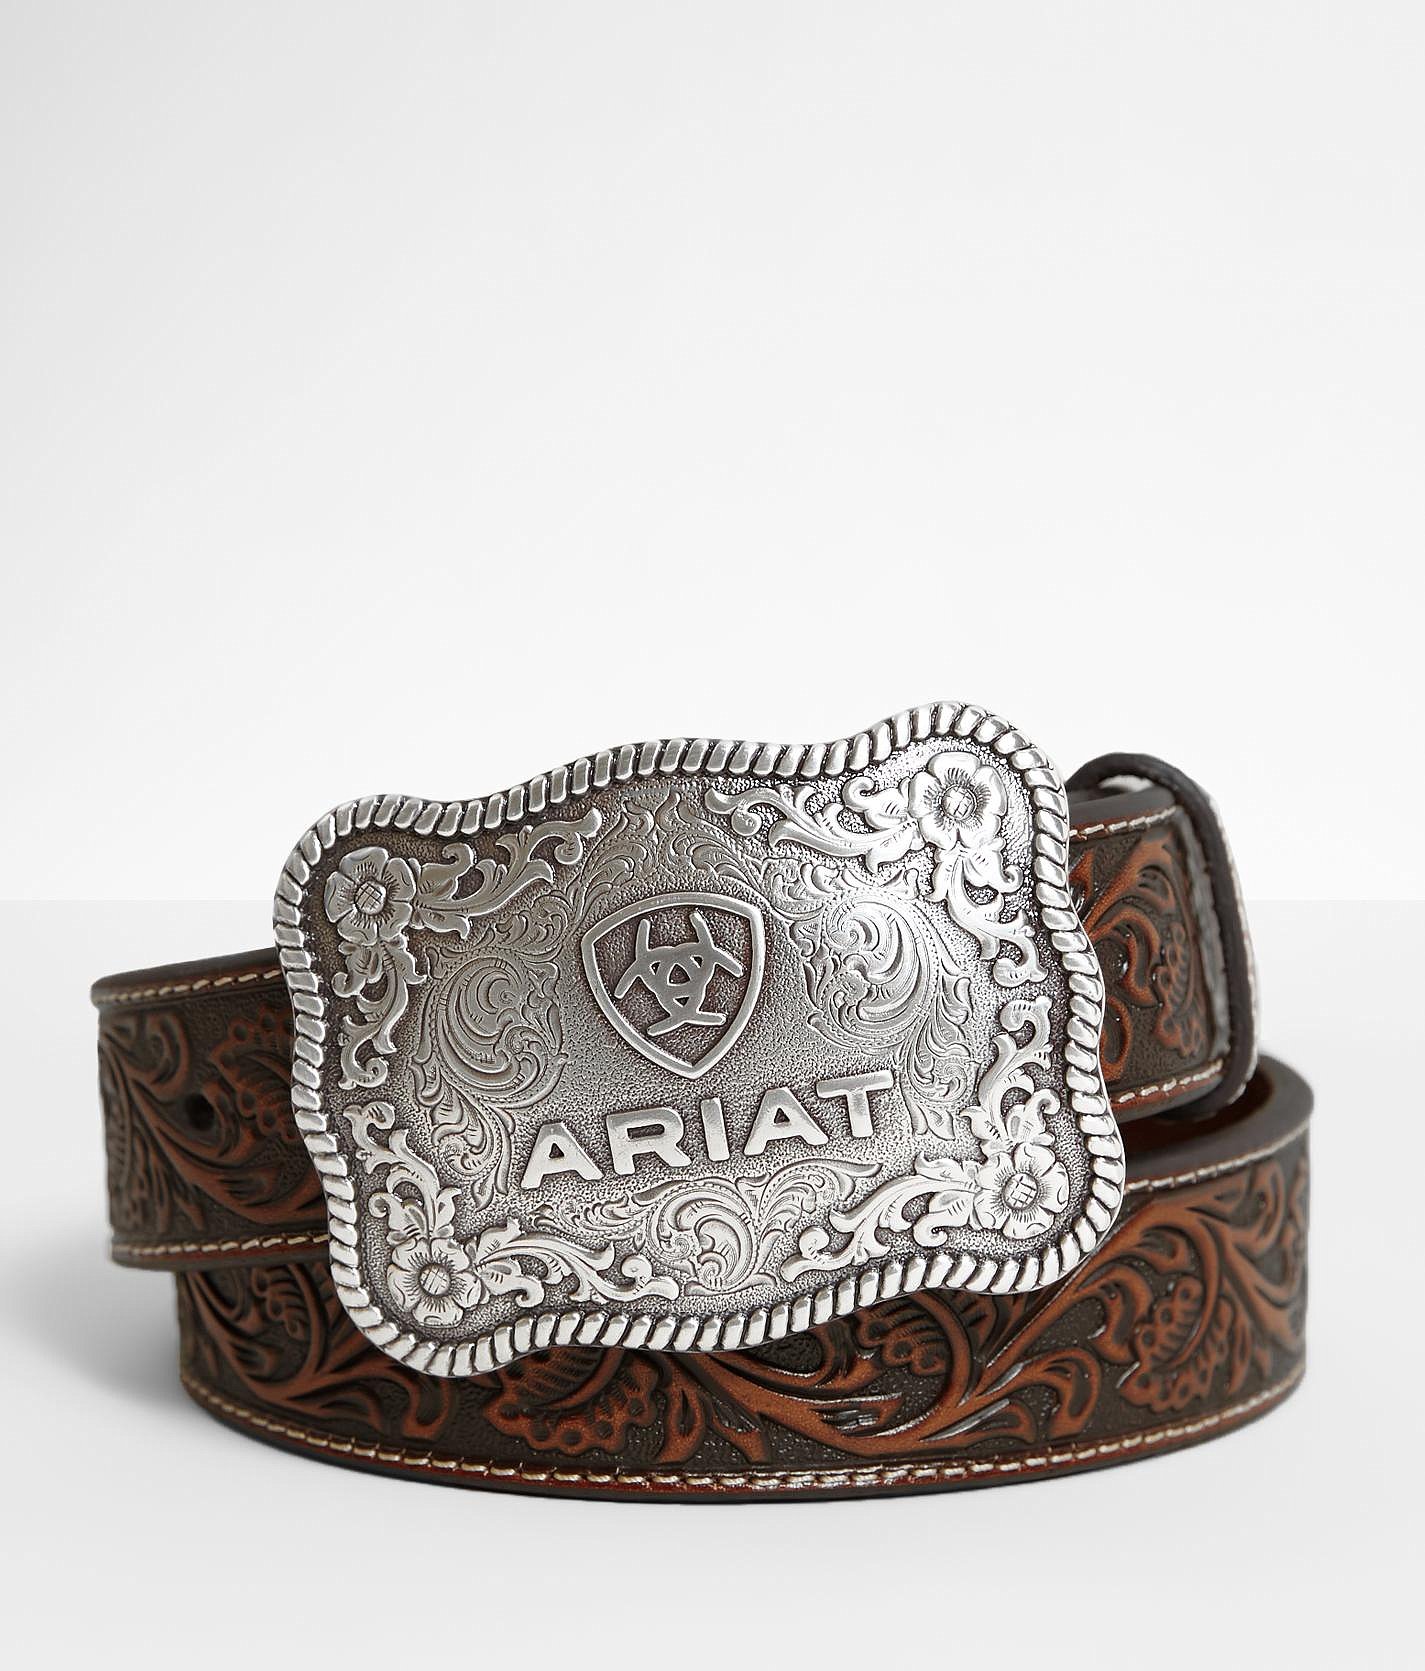 where can you buy belt buckles